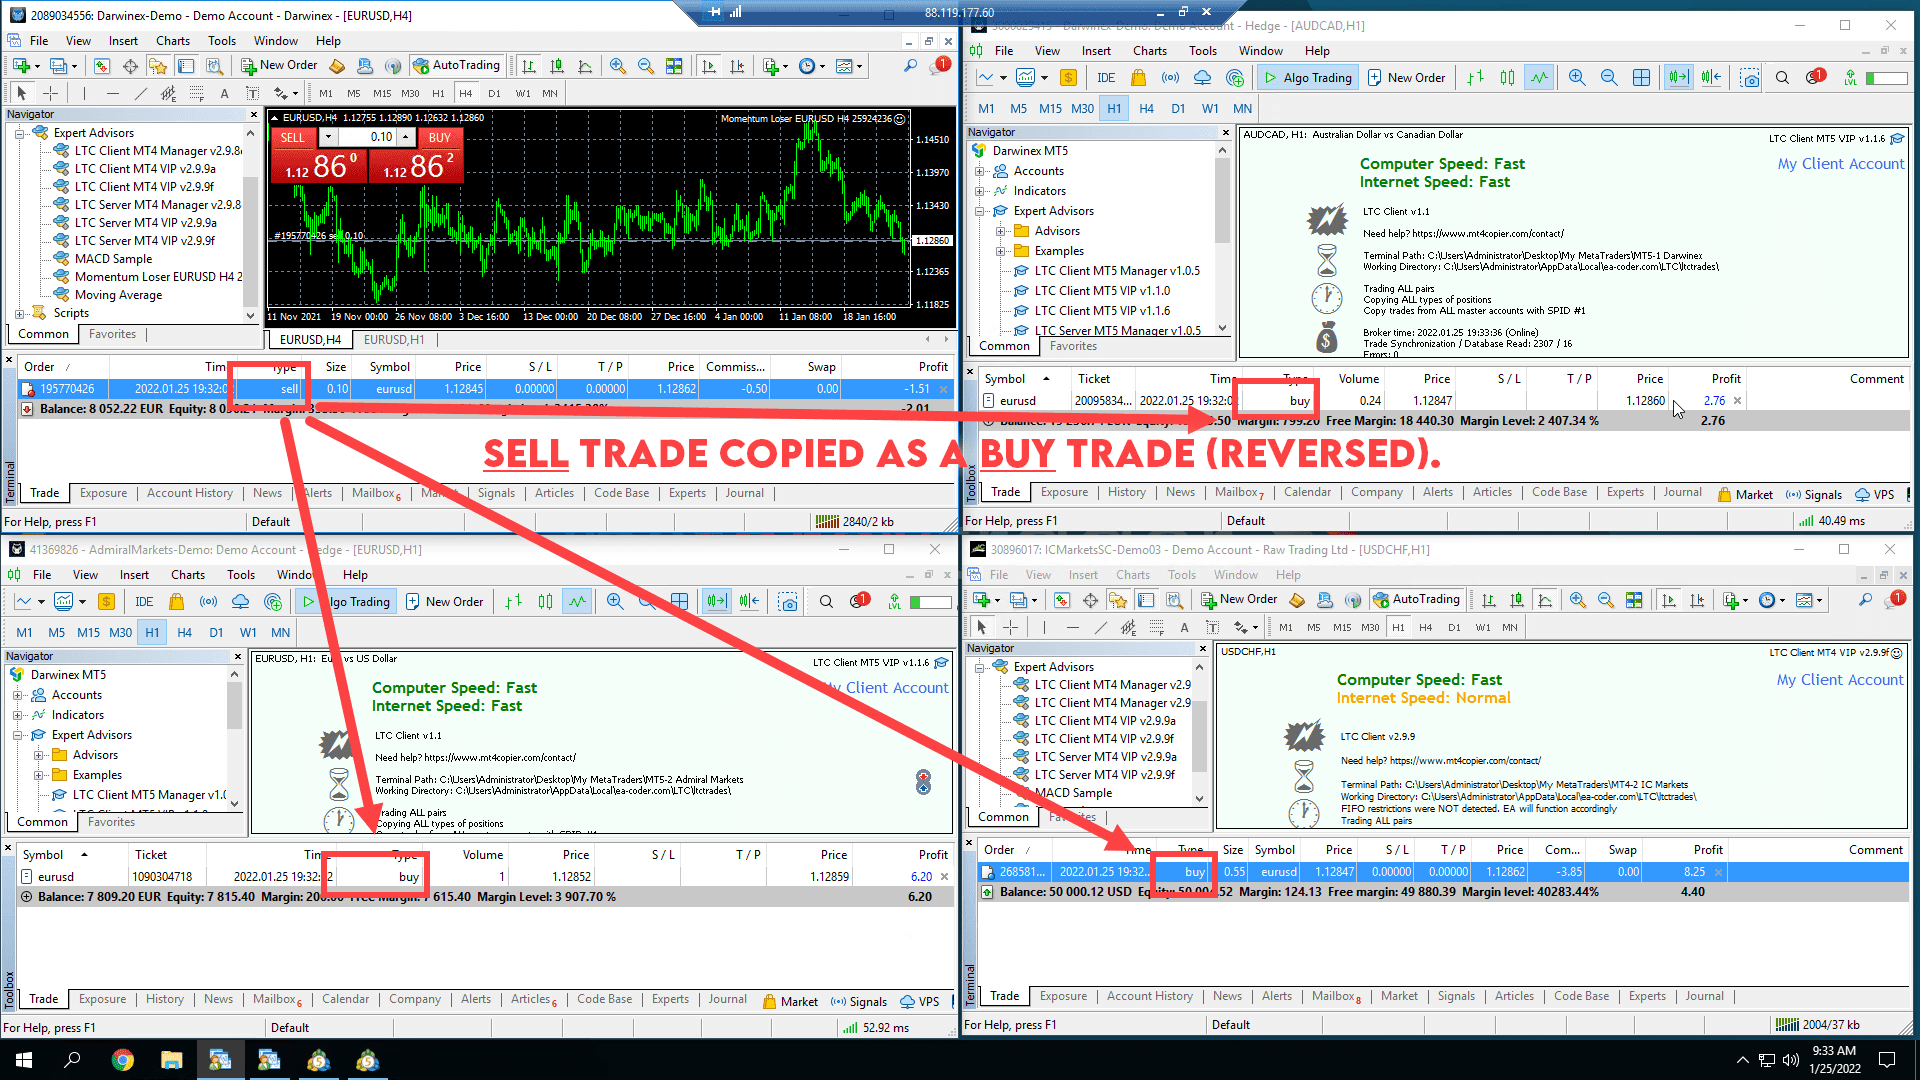 SELL trade copied as BUY trade (reversed)